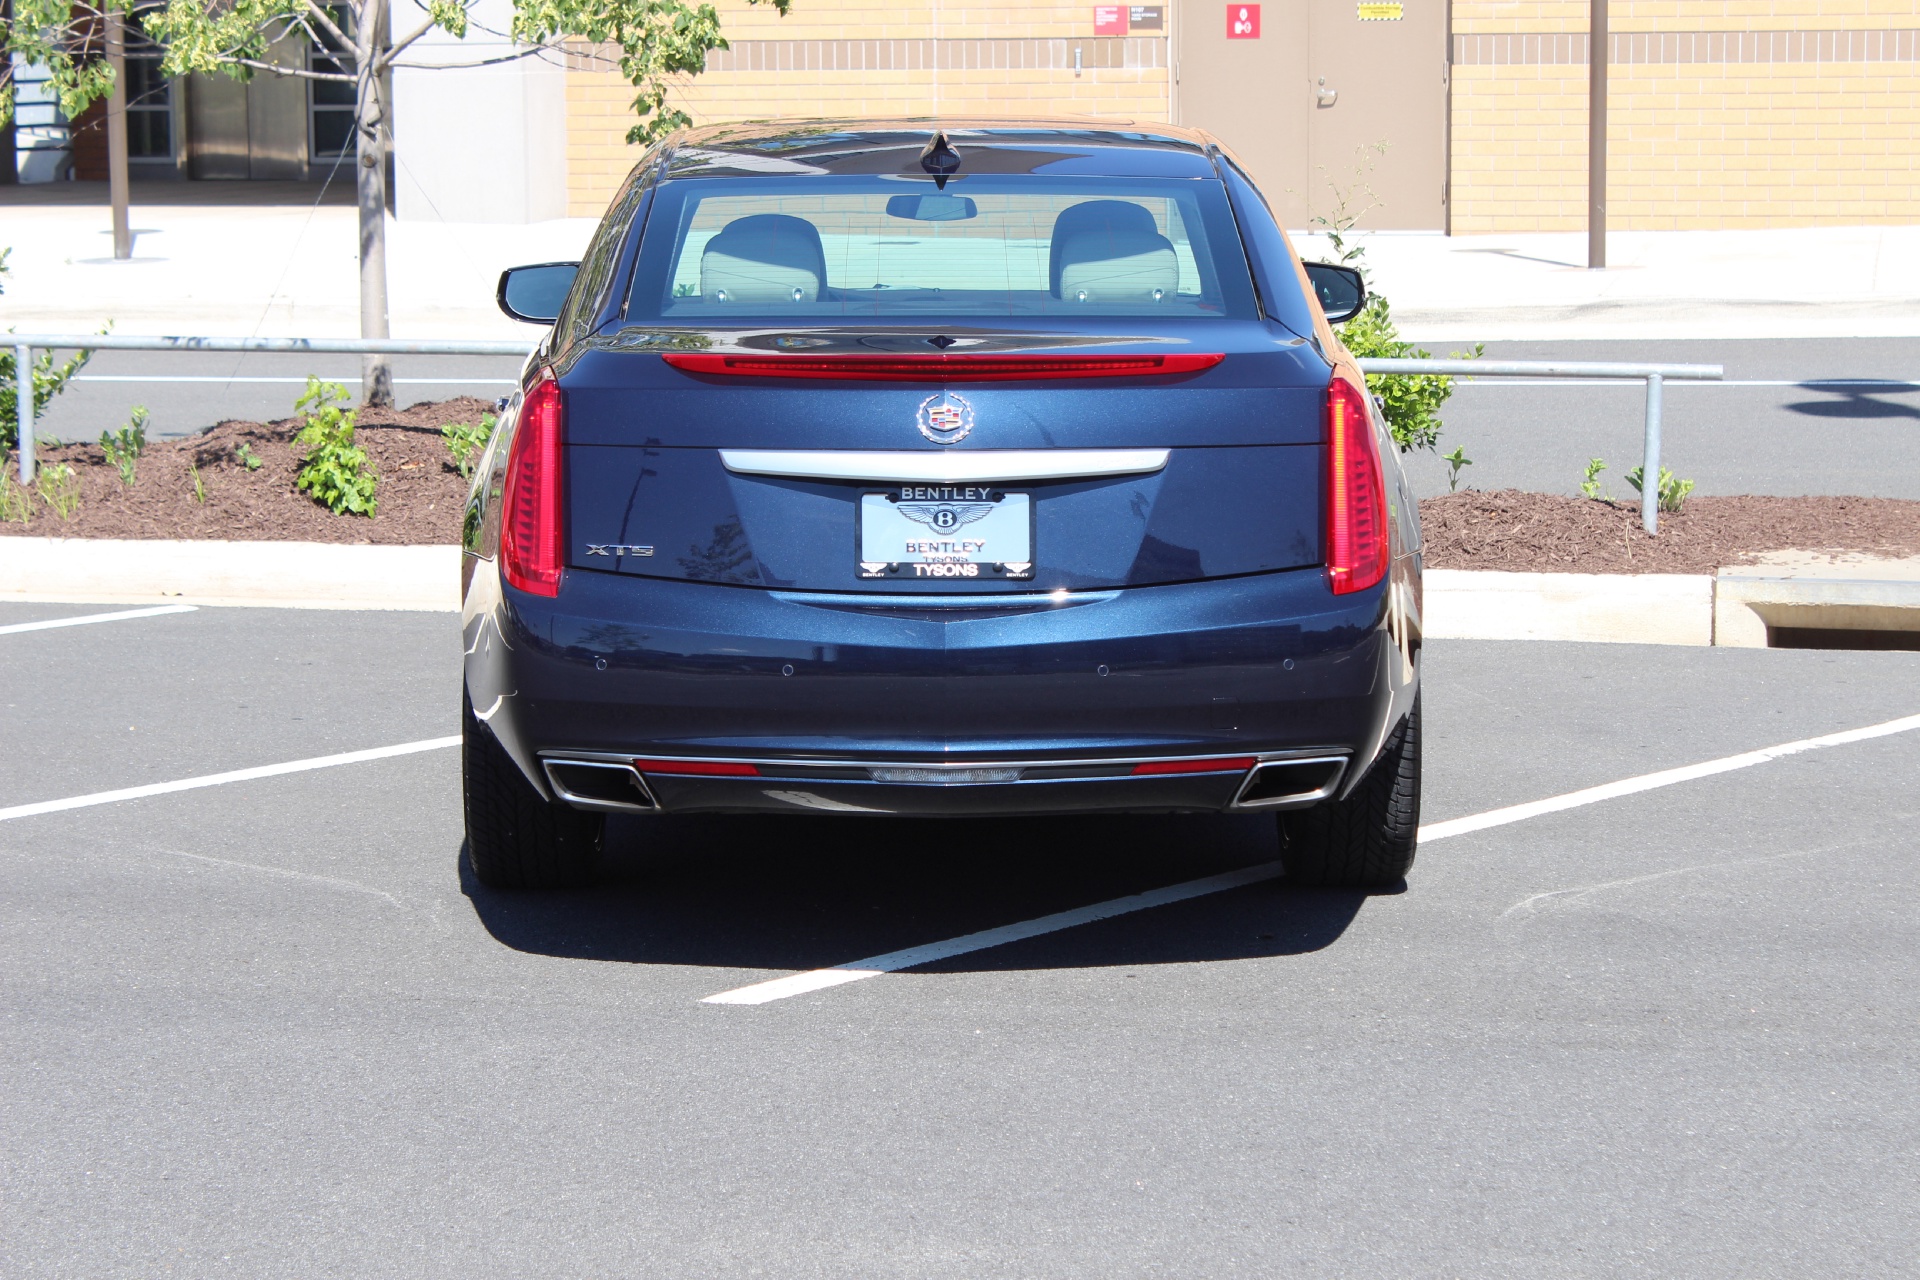 Used 2015 Cadillac XTS Luxury For Sale (Sold) | Aston Martin Washington DC  Stock #6NG8050965A